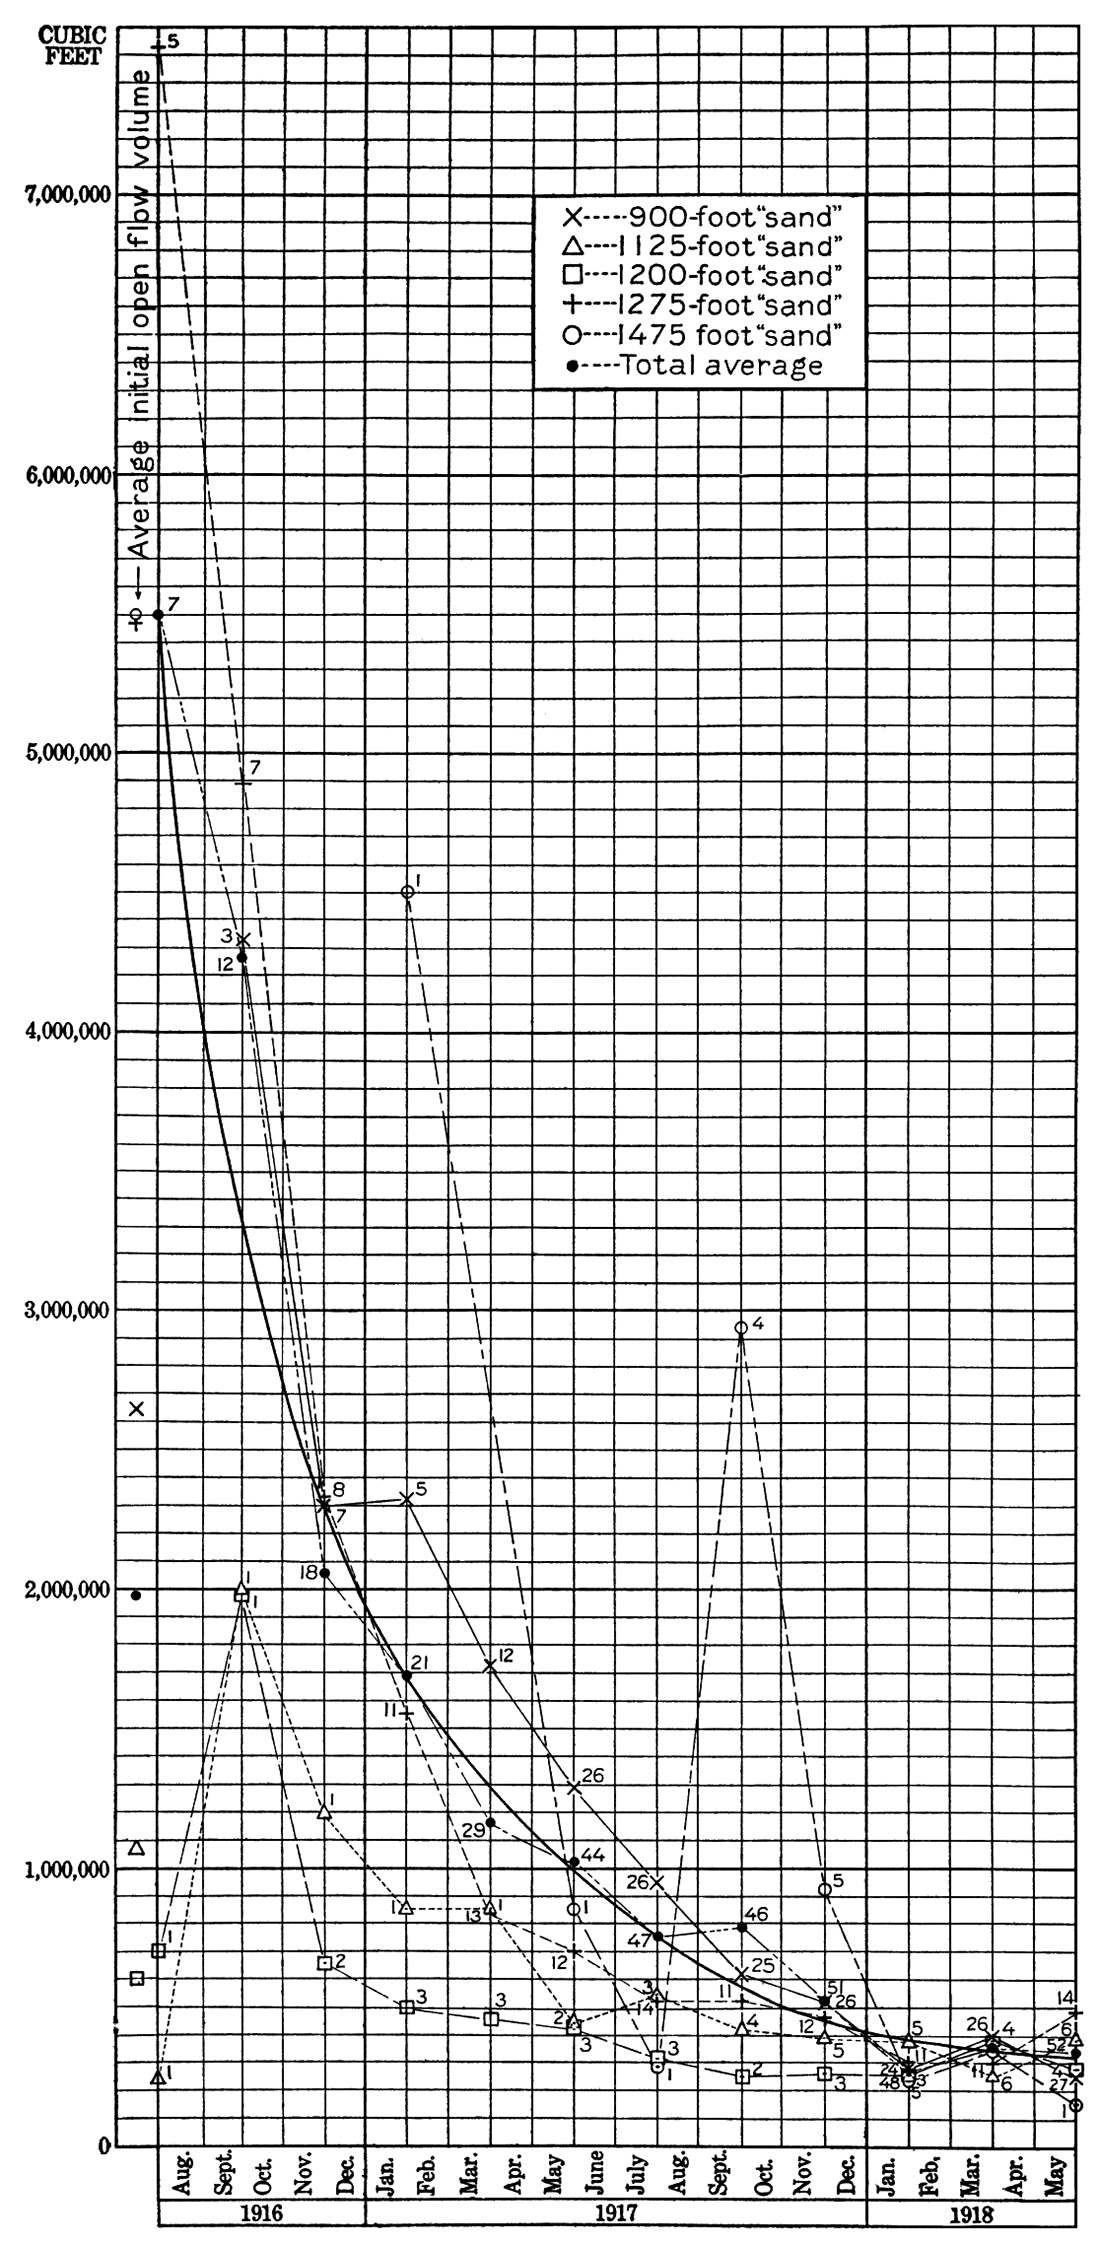 Decline curve of closed rock pressures based on the records of 68 wells grouped according to the sands from which they produce.